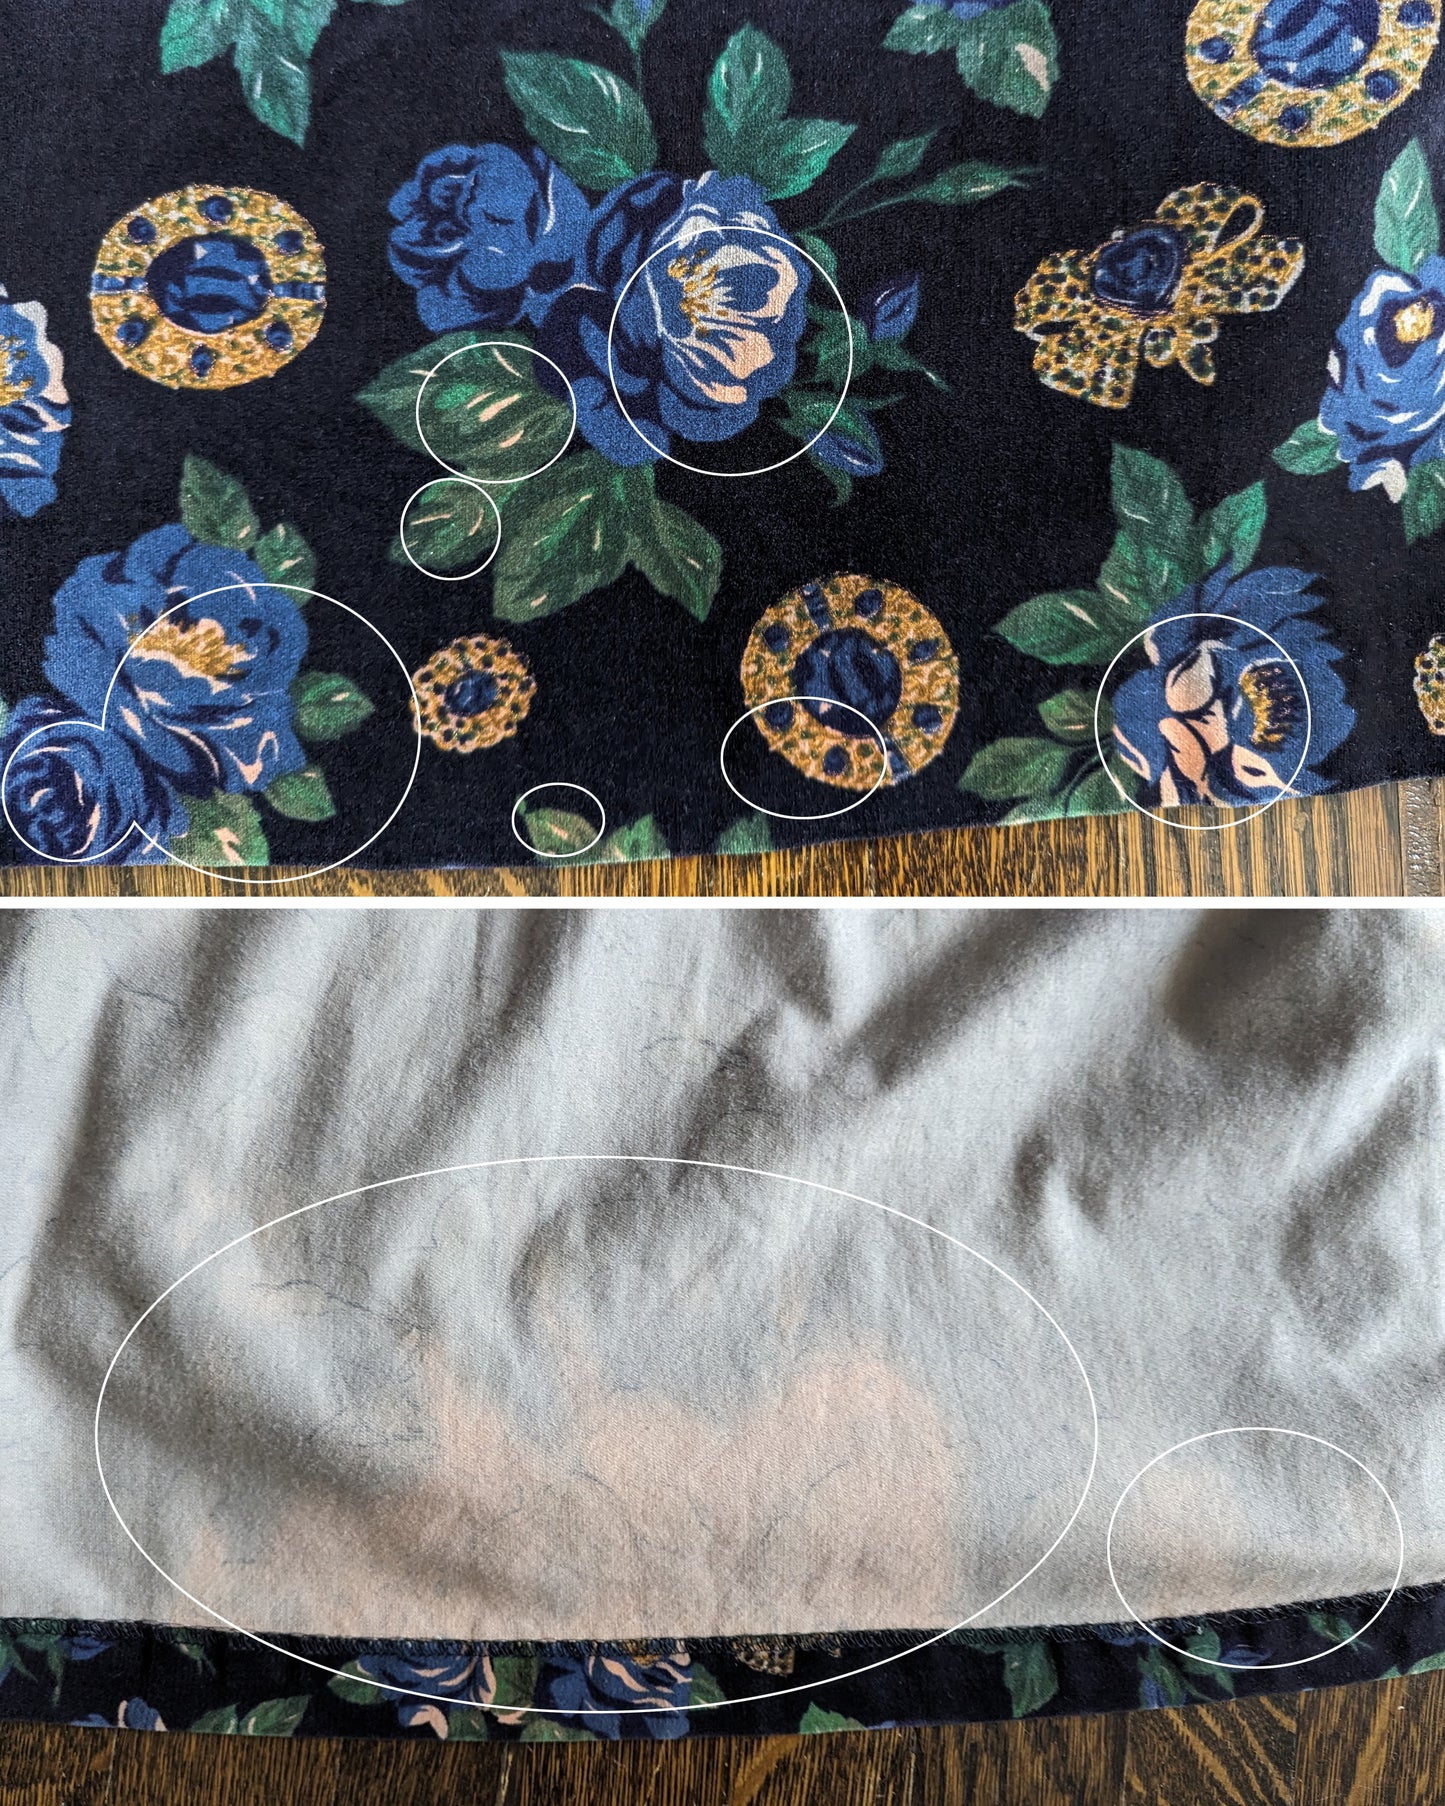 Side by side front and inside view of a discolored spit on the inside of the hem that shows up pink on the outside